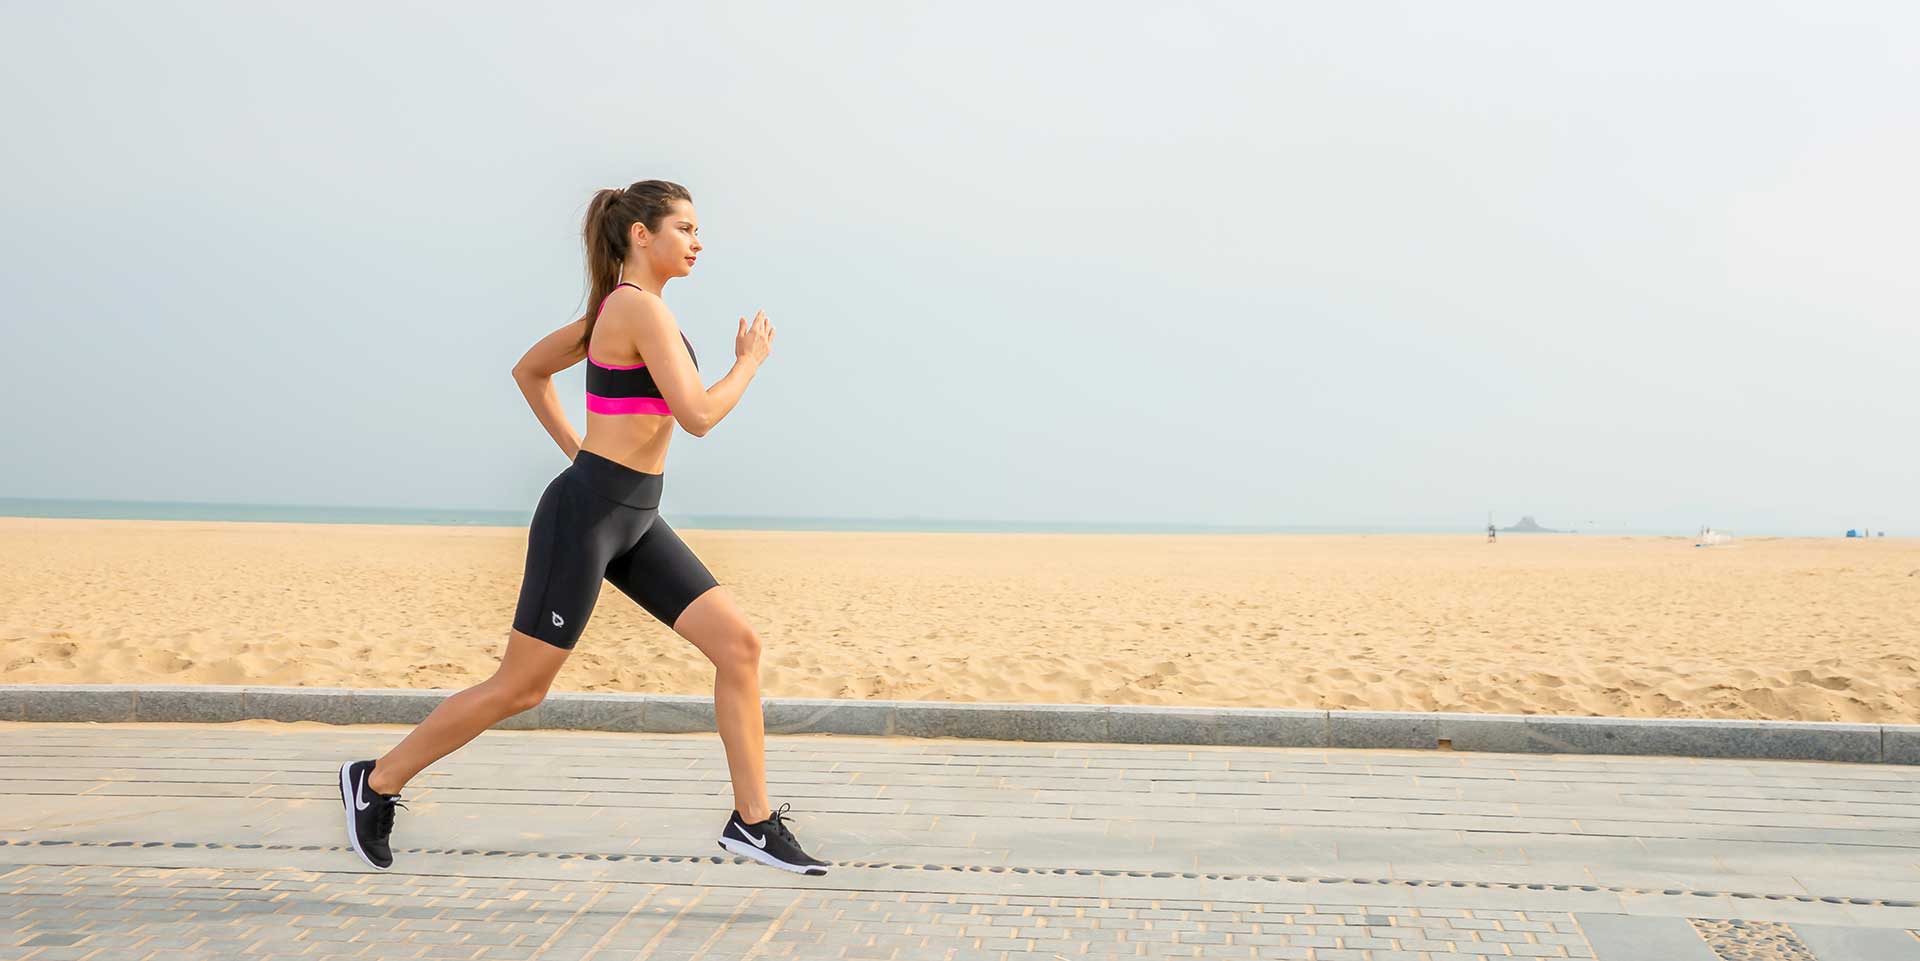 What Does Jogging for 30 Minutes Do to Your Body?